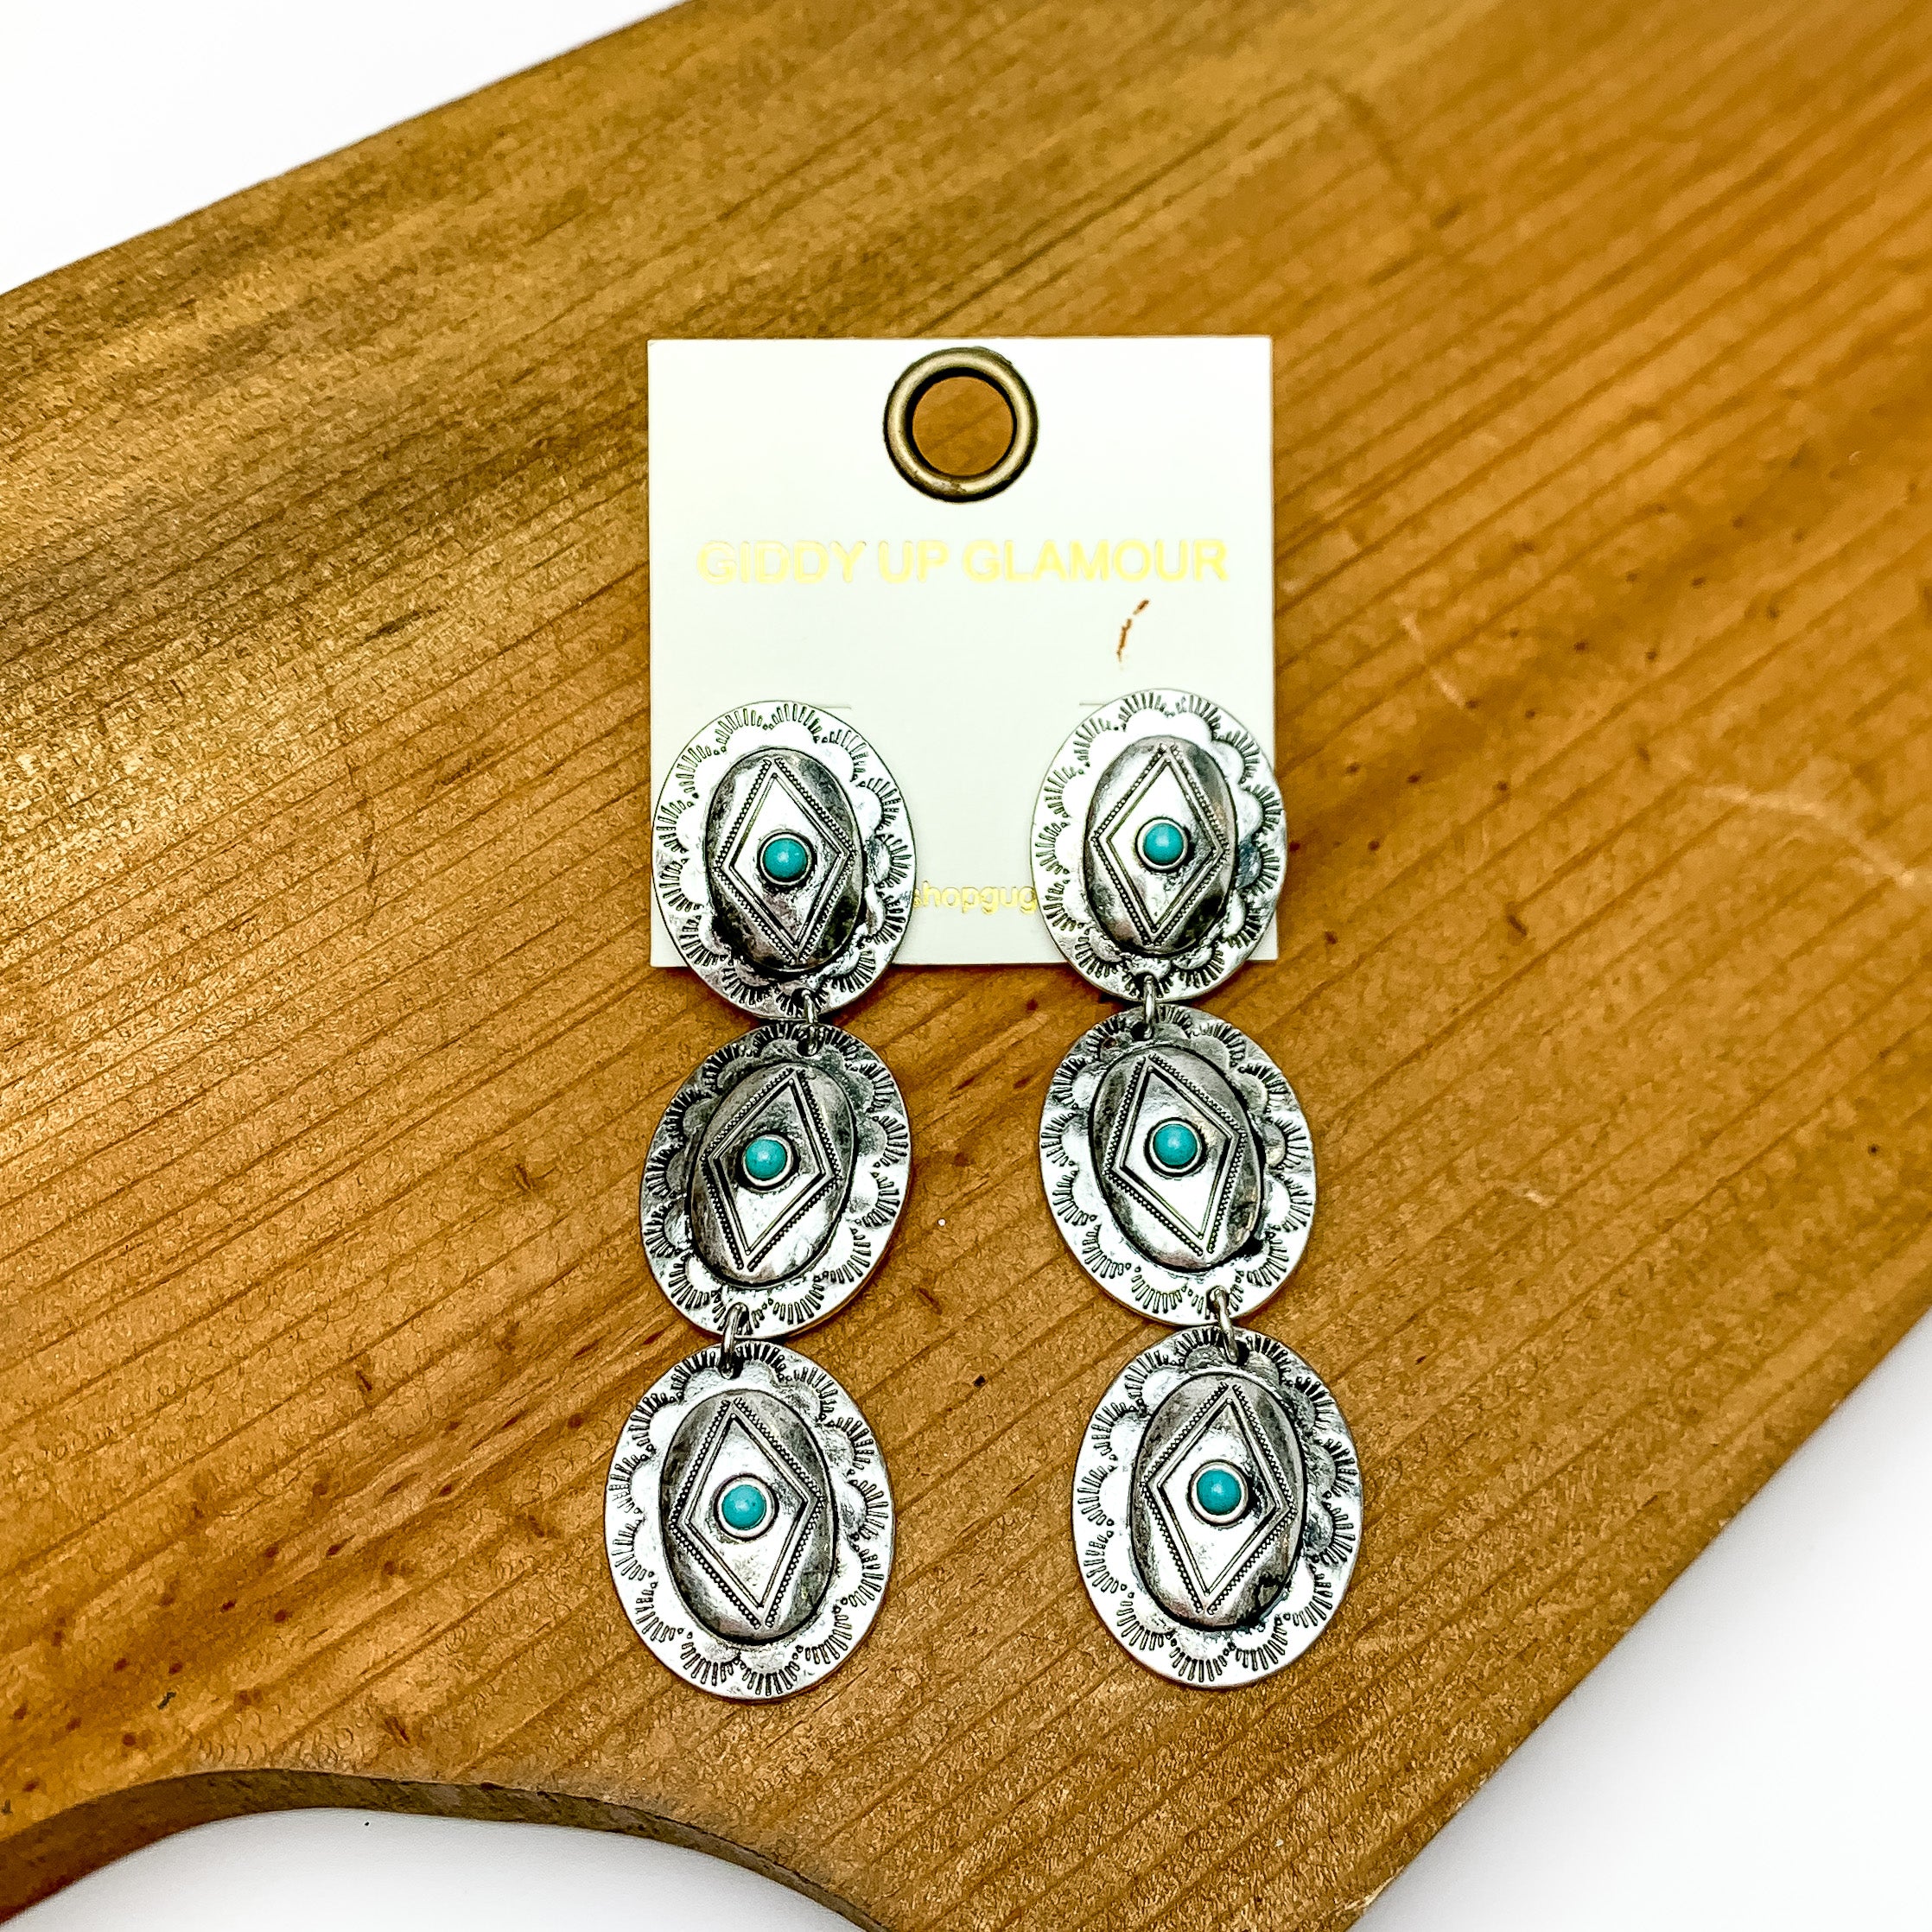 Three tier silver tone and turquois oval shape dangle earrings. Pictured on a wood piece with white in the back.